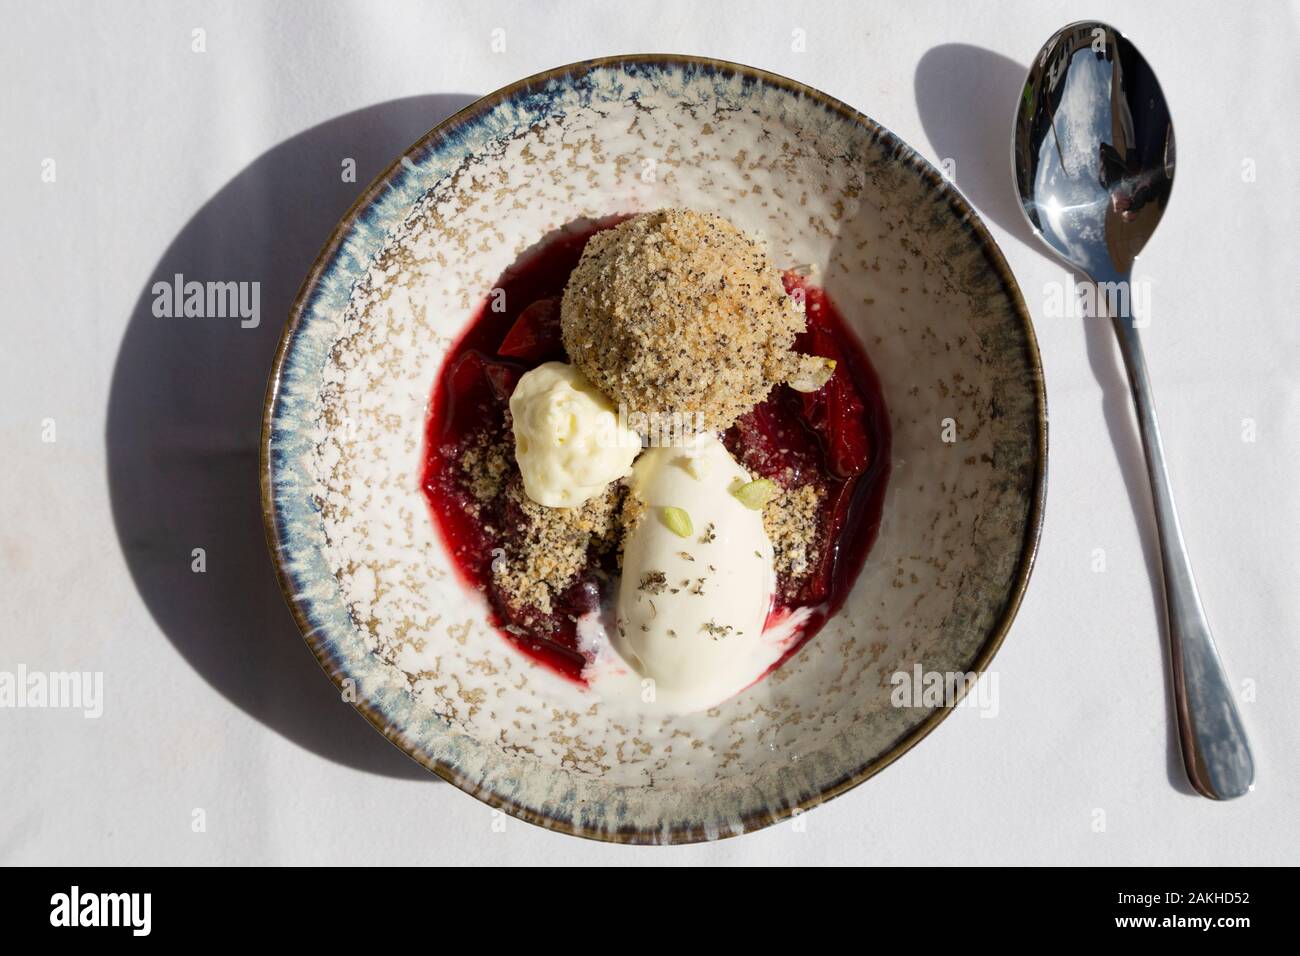 A dessert featuring ice cream, fruit sauce and a form of dumpling served in Zell am See, Austria. It is served in a handcrafted bowl. Stock Photo